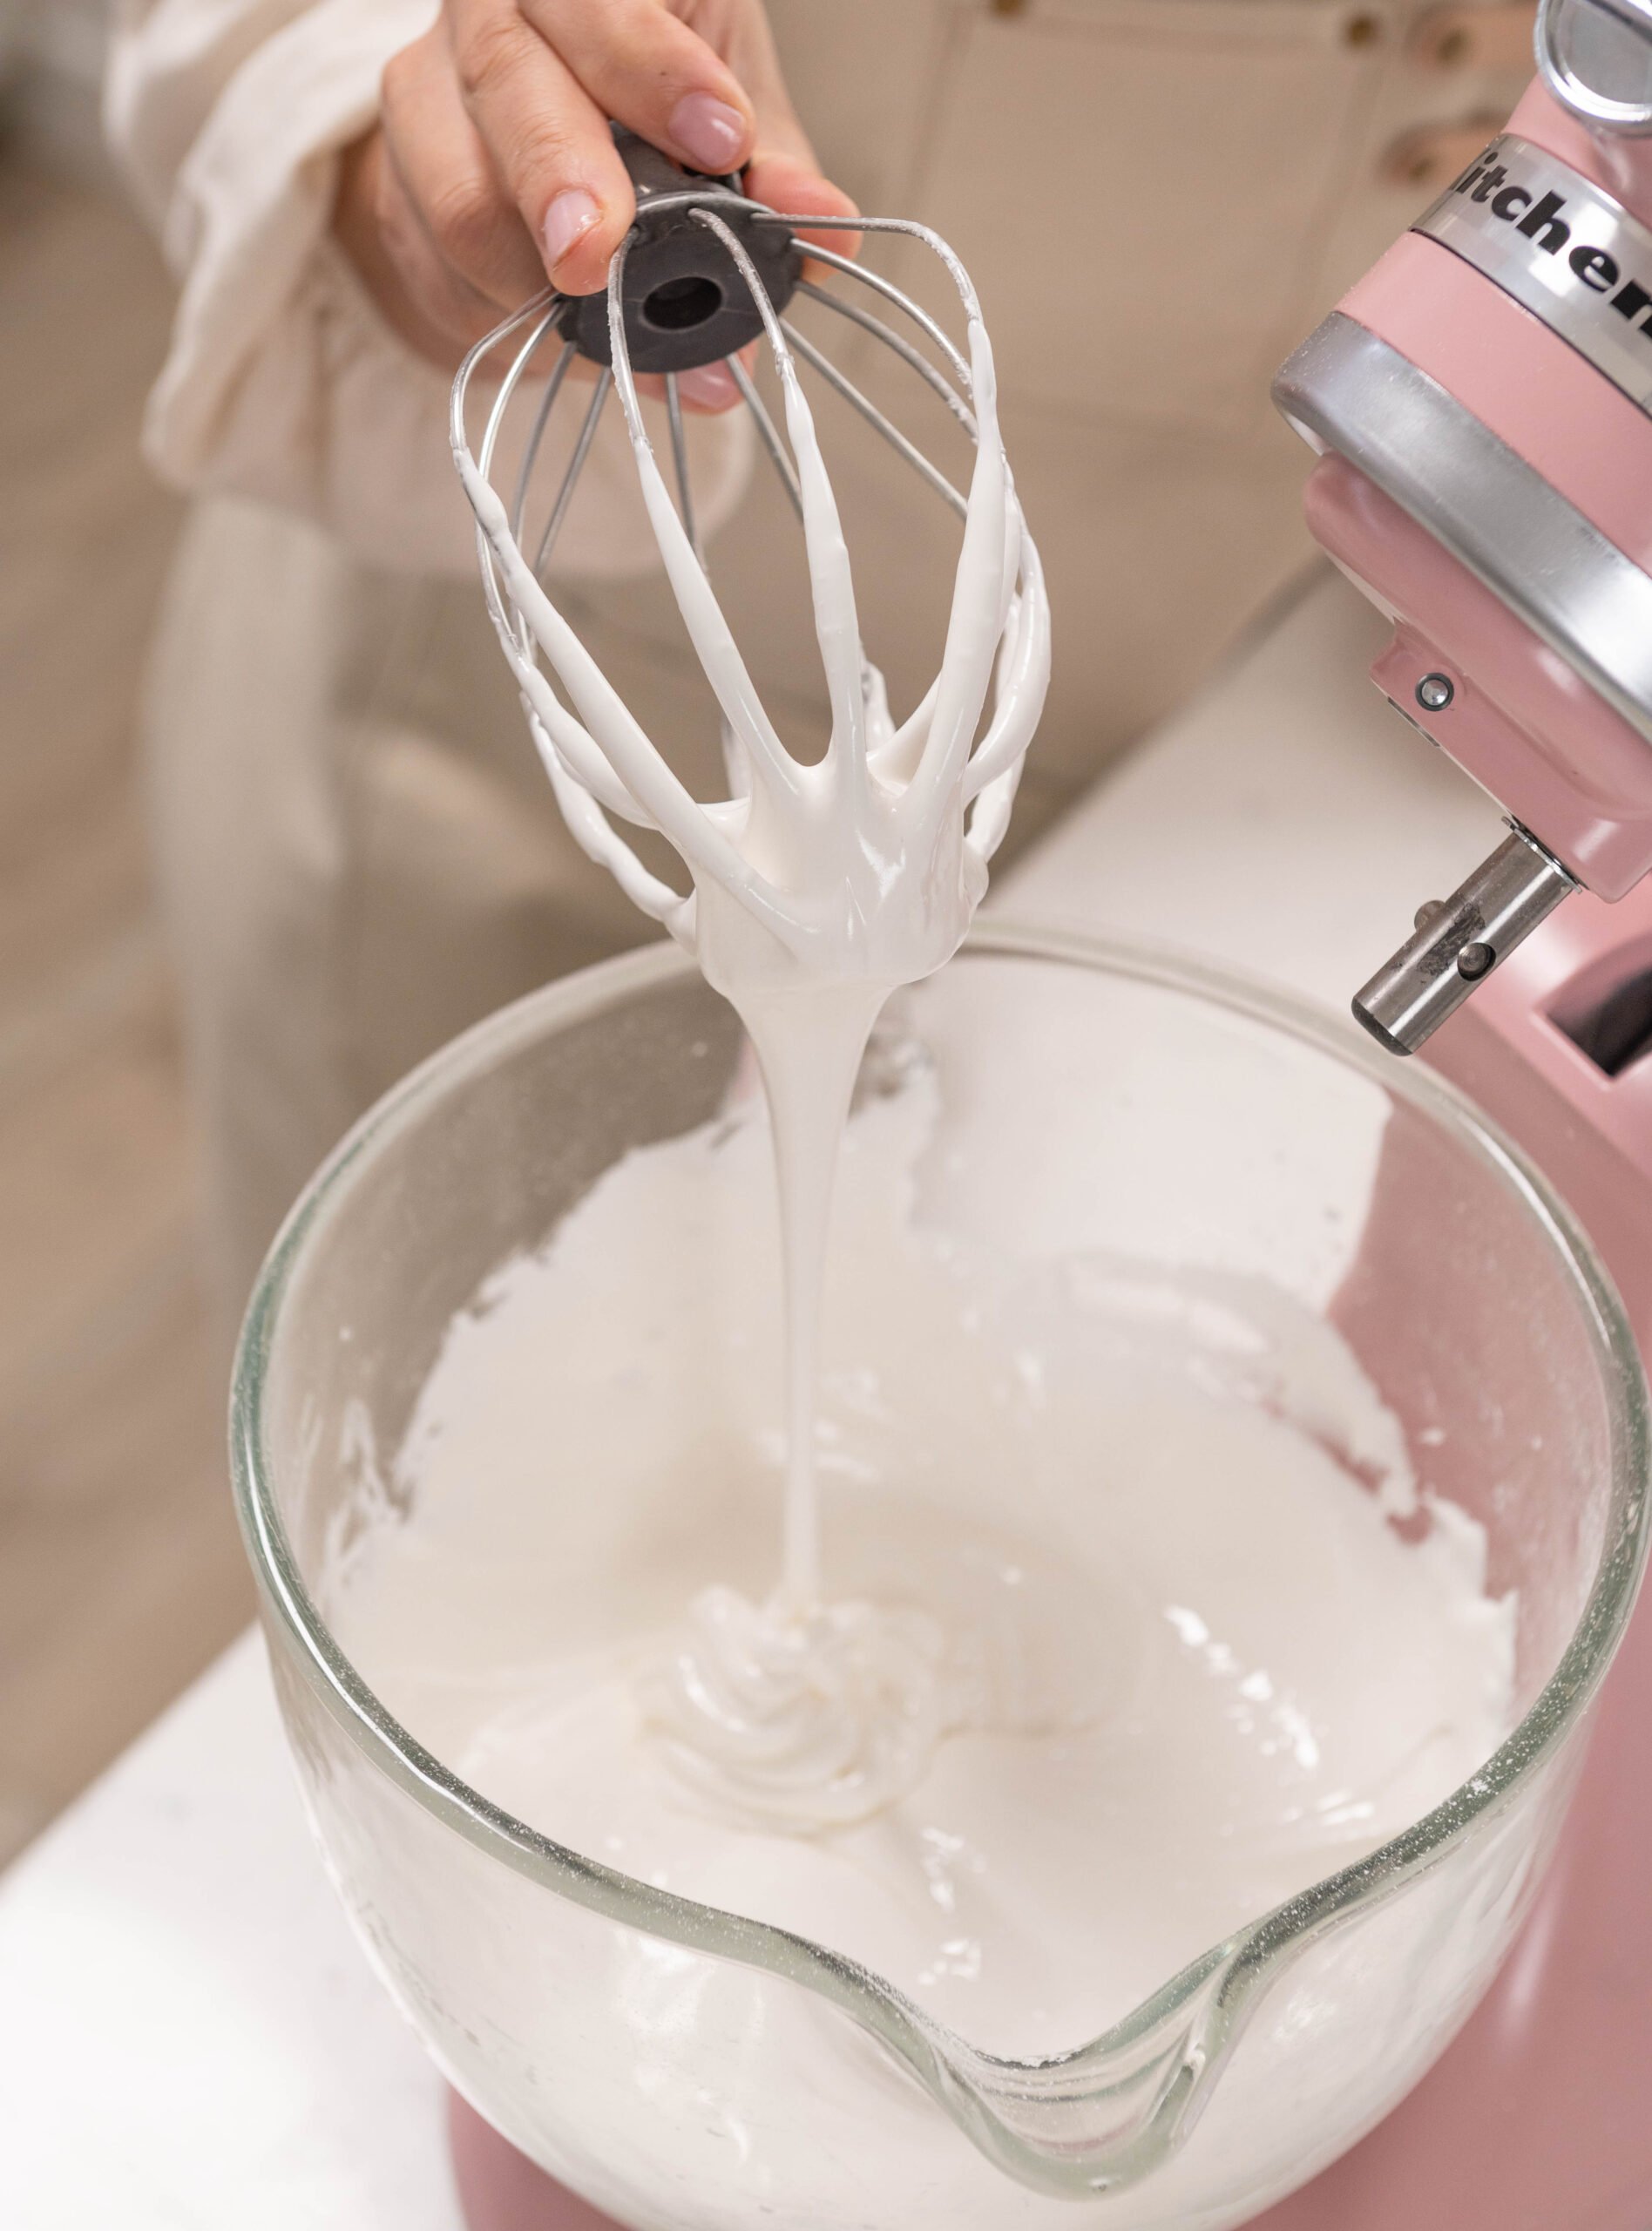 stand mixer bowl filled with meringue